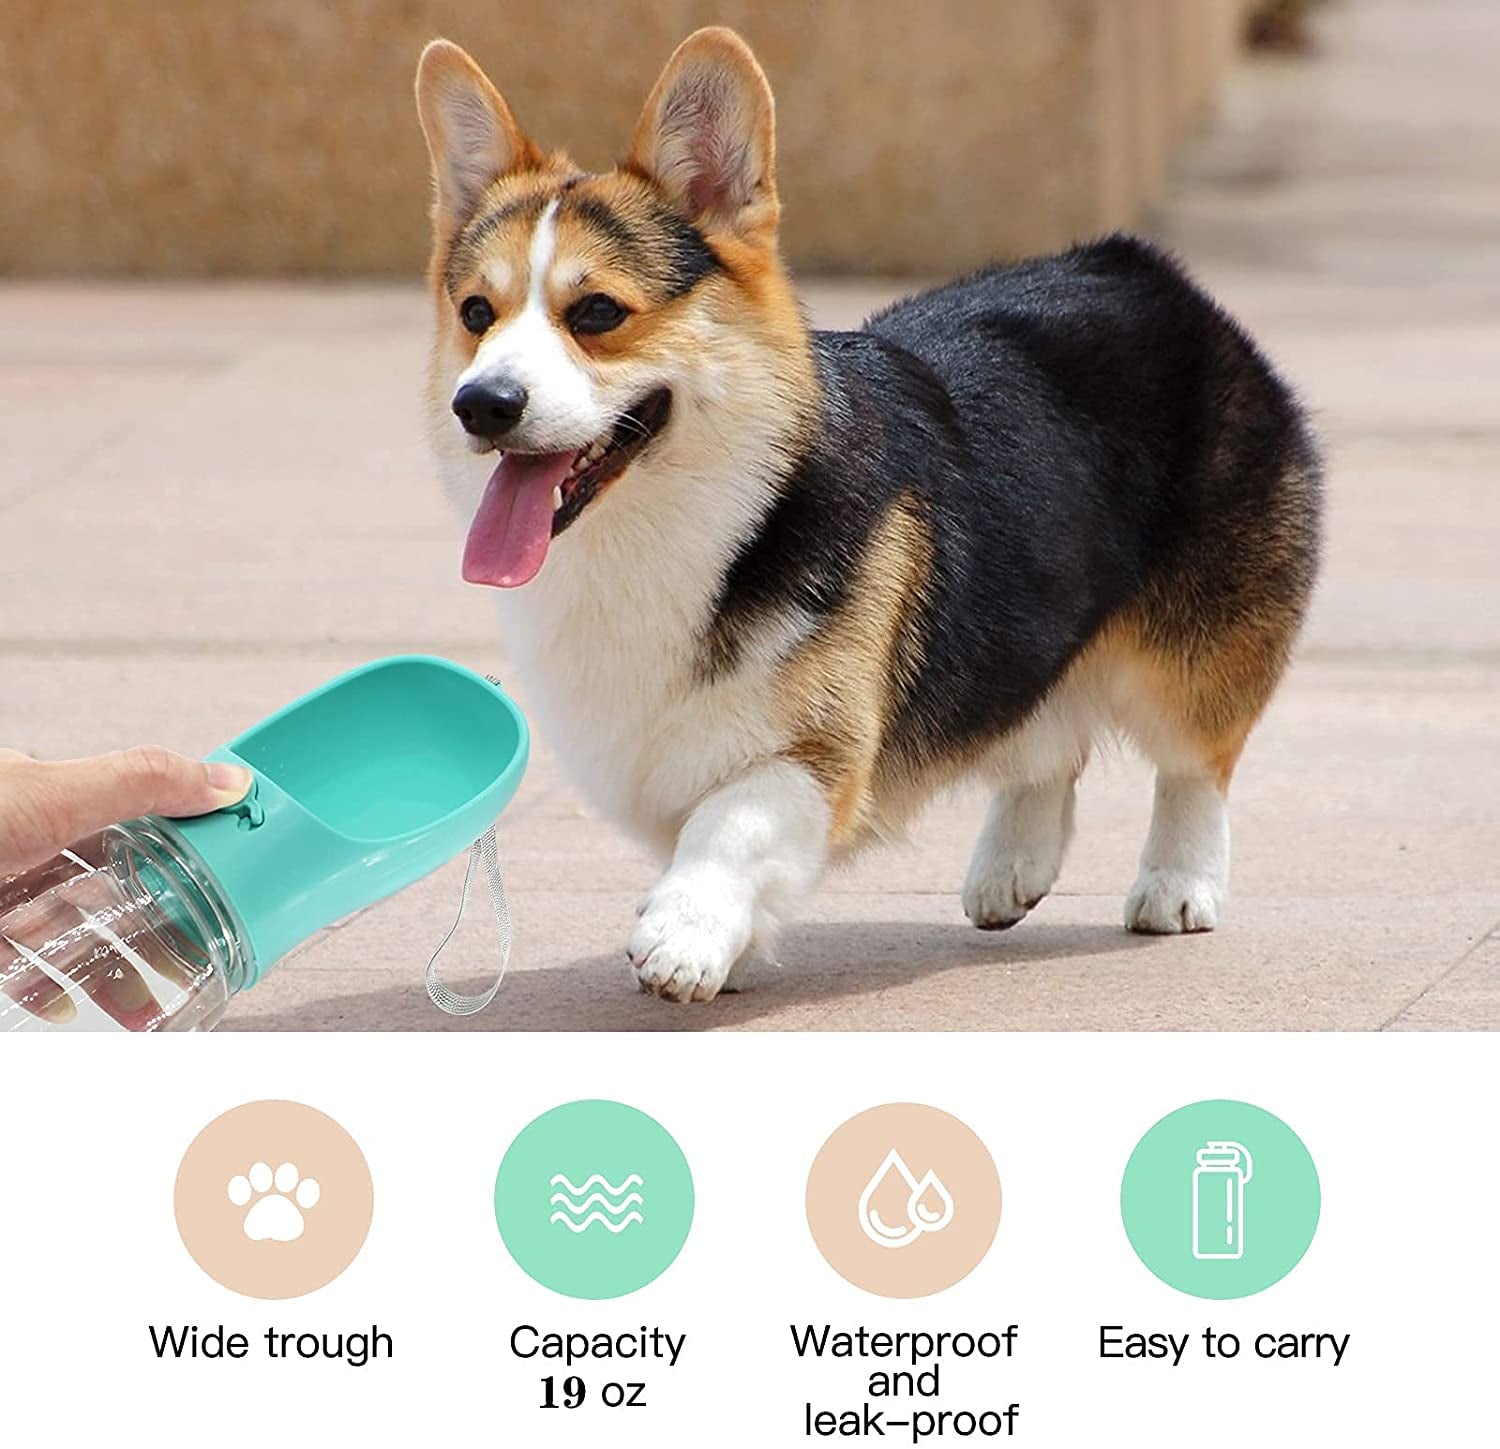 Dog Water Bottle Dog Bowls Dog Water Bowl Dispenser Portable Dog Water Bottles for Cat,Rabbit,Puppy and Other Pets for Walking,Hiking,Travel…